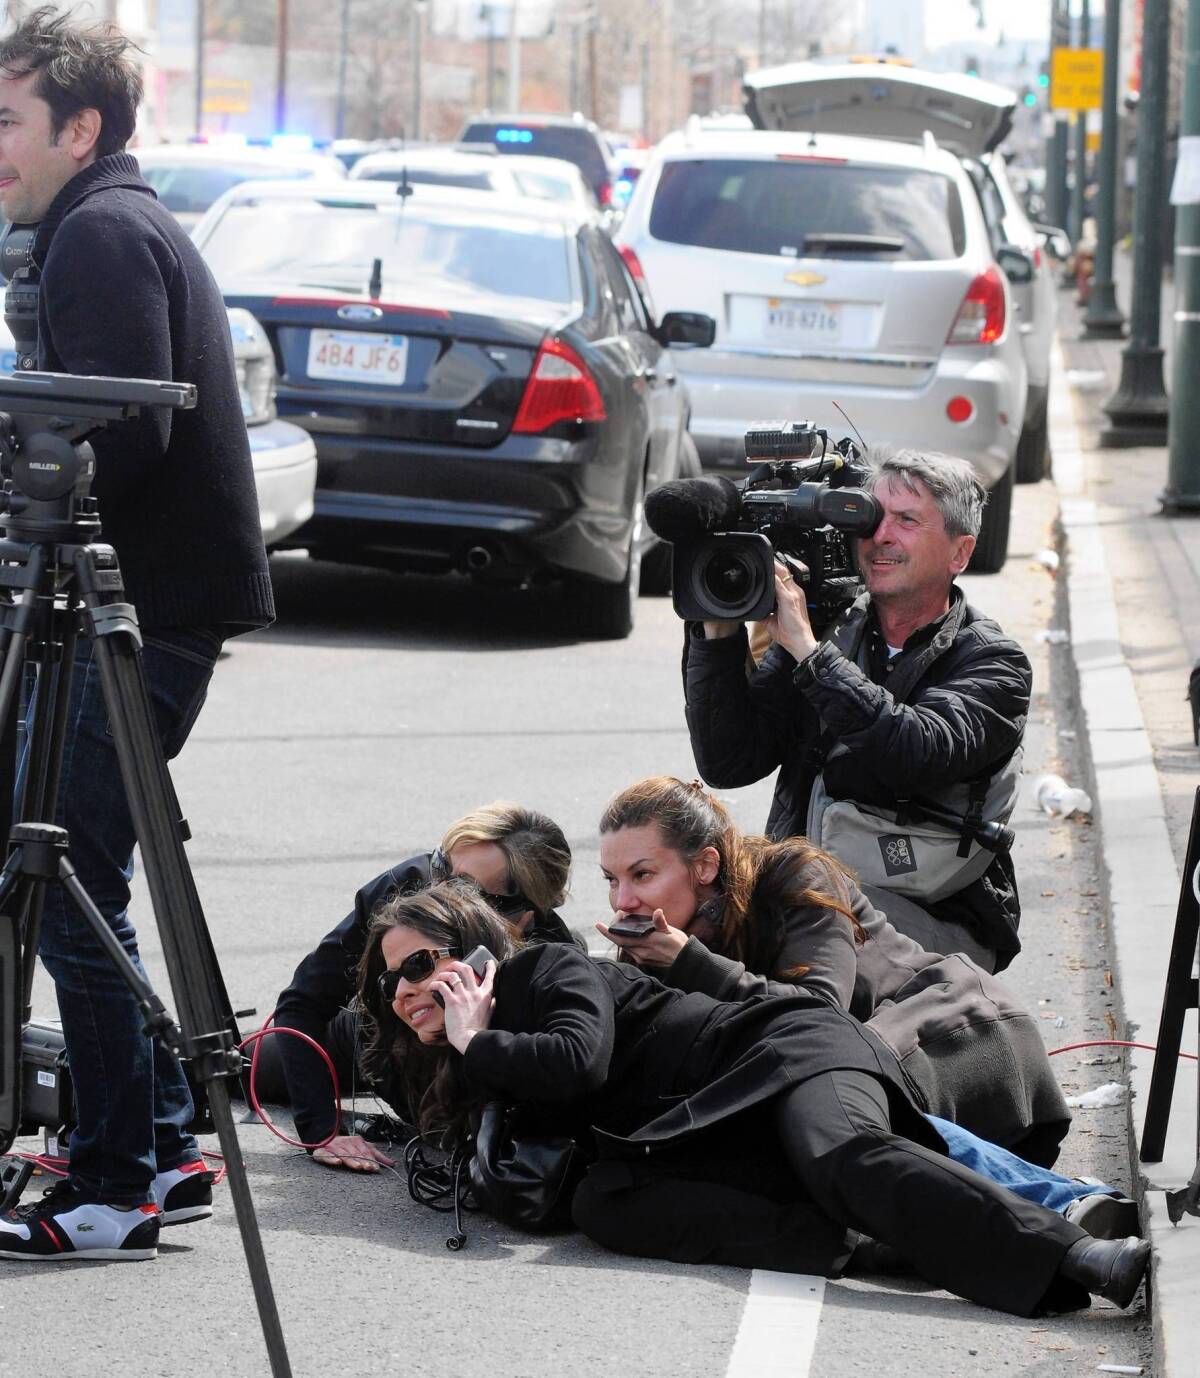 Journalists take cover during the manhunt for the second suspect of the Boston Marathon bombing in Watertown, Mass. Some traditional media got caught up in the frenzy of online speculation used incorrect information from anonymous posters.